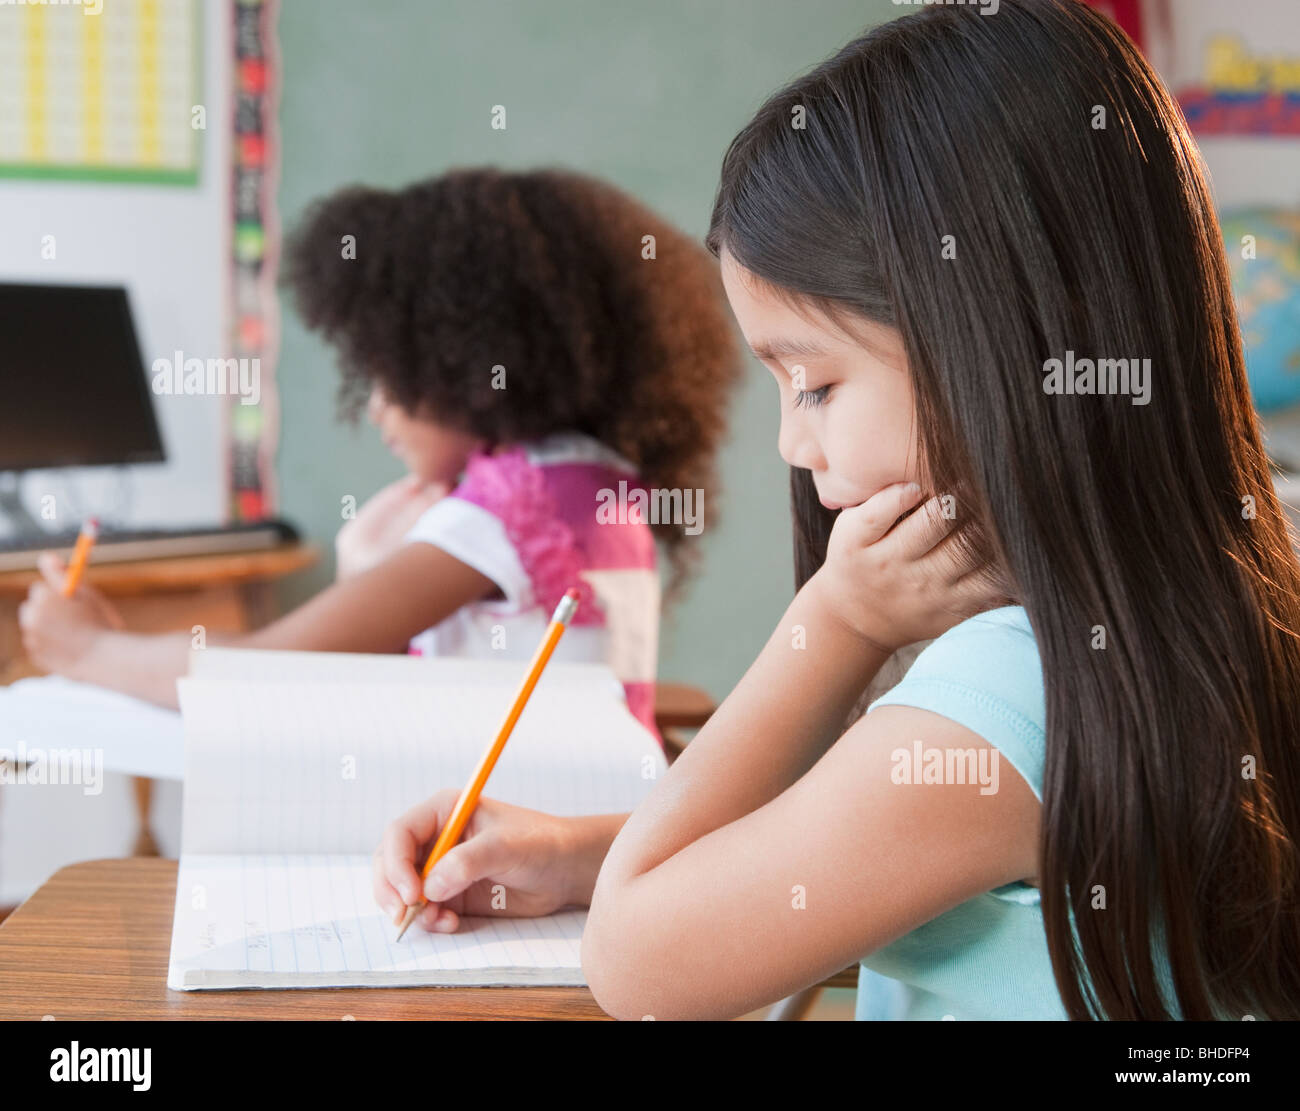 Mixed race school girl writing in notebook Stock Photo